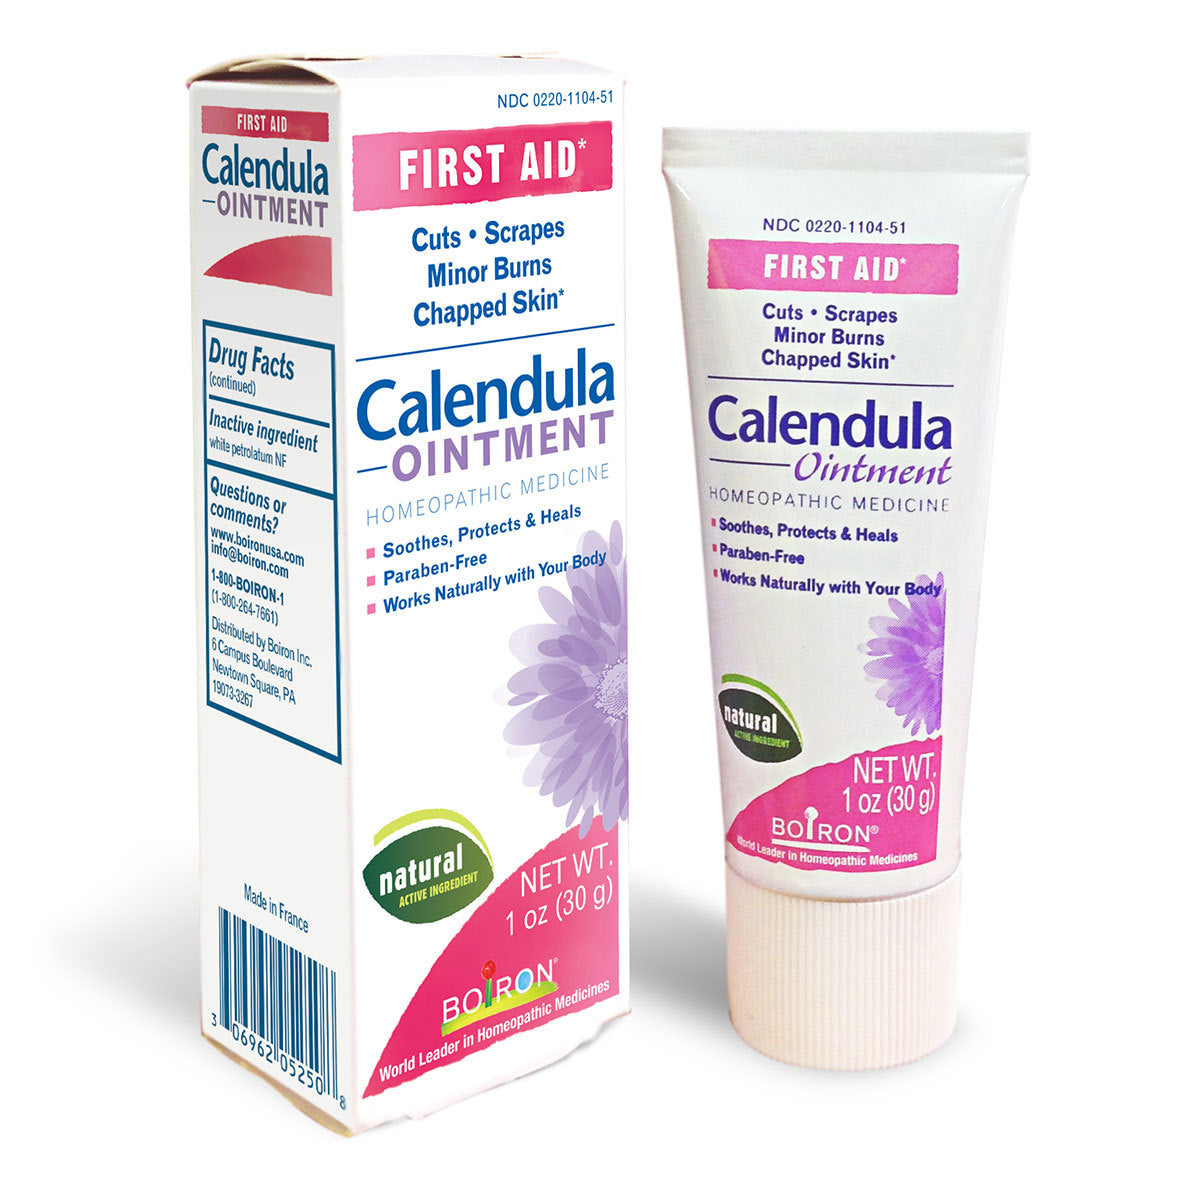 Primary image of Calendula Ointment